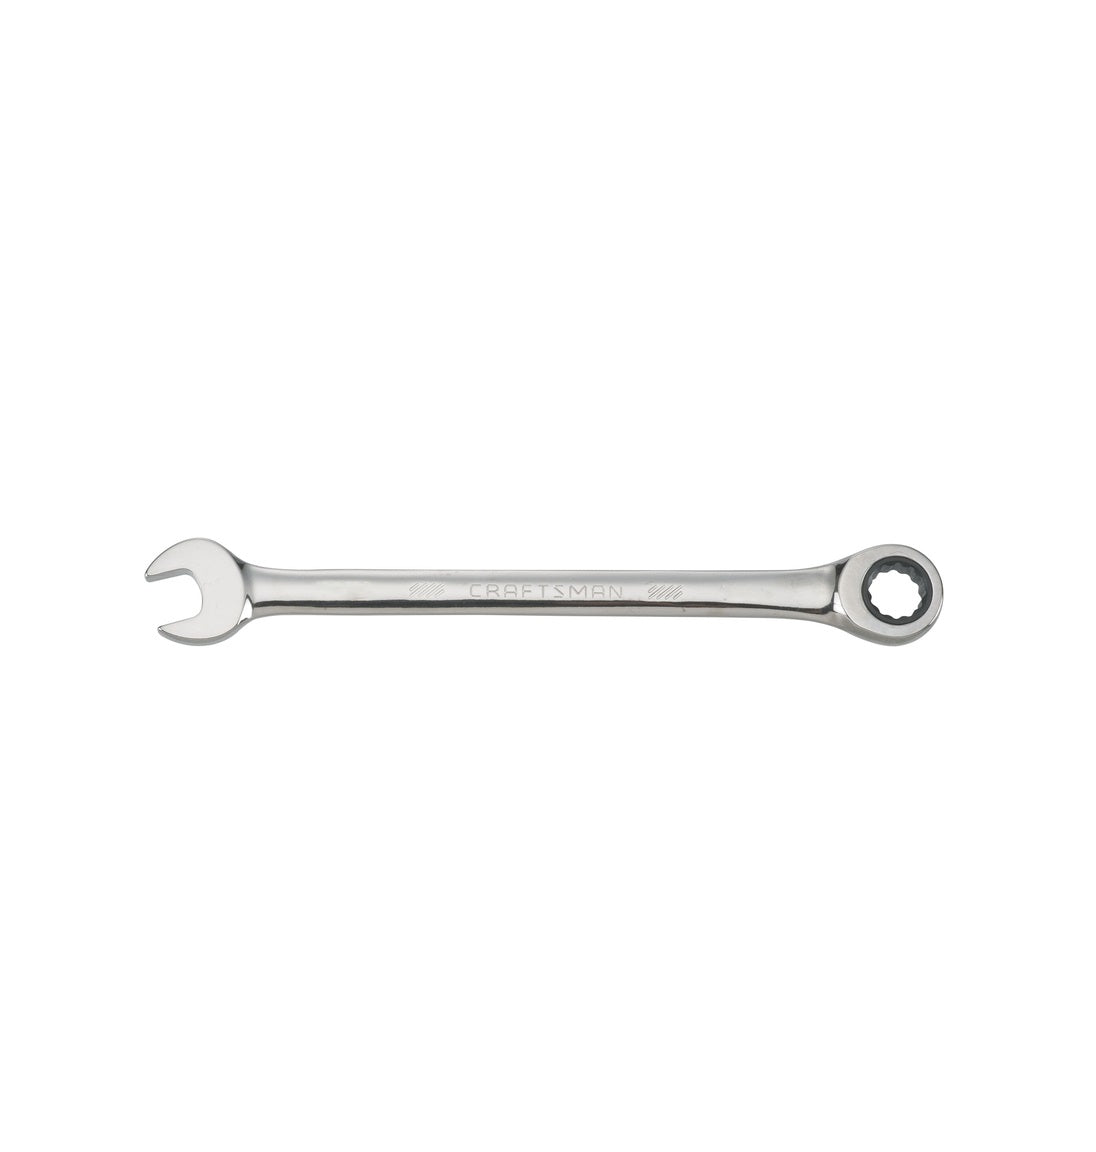 Craftsman CMMT42936 Combination Wrench, Metric, 16.8 inch, 32 mm